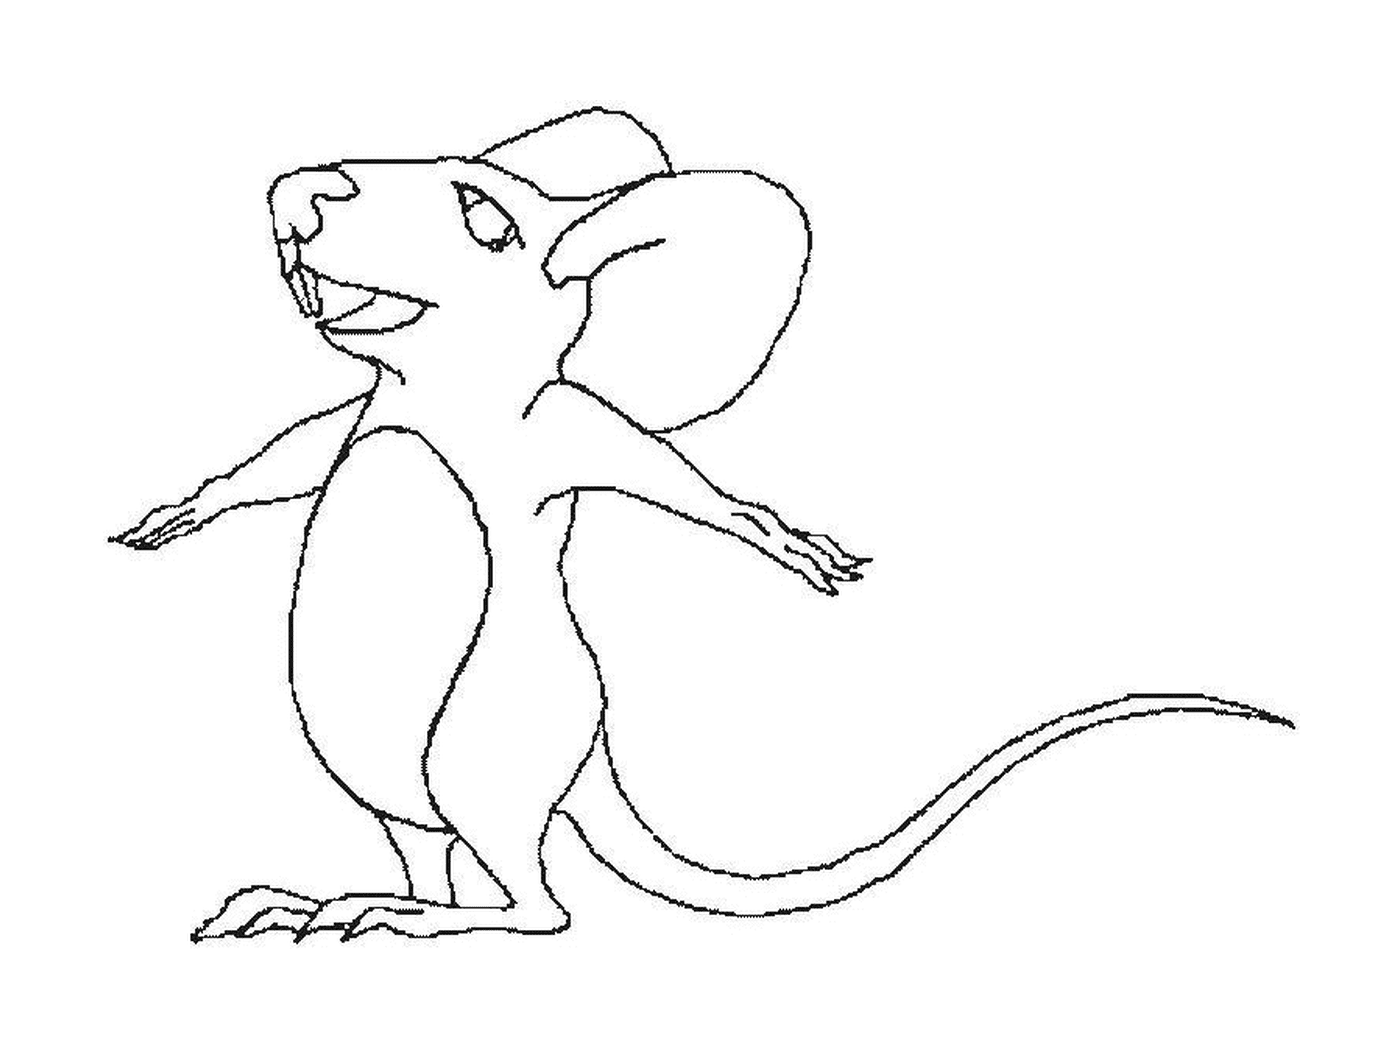  A mouse with arms outstretched 